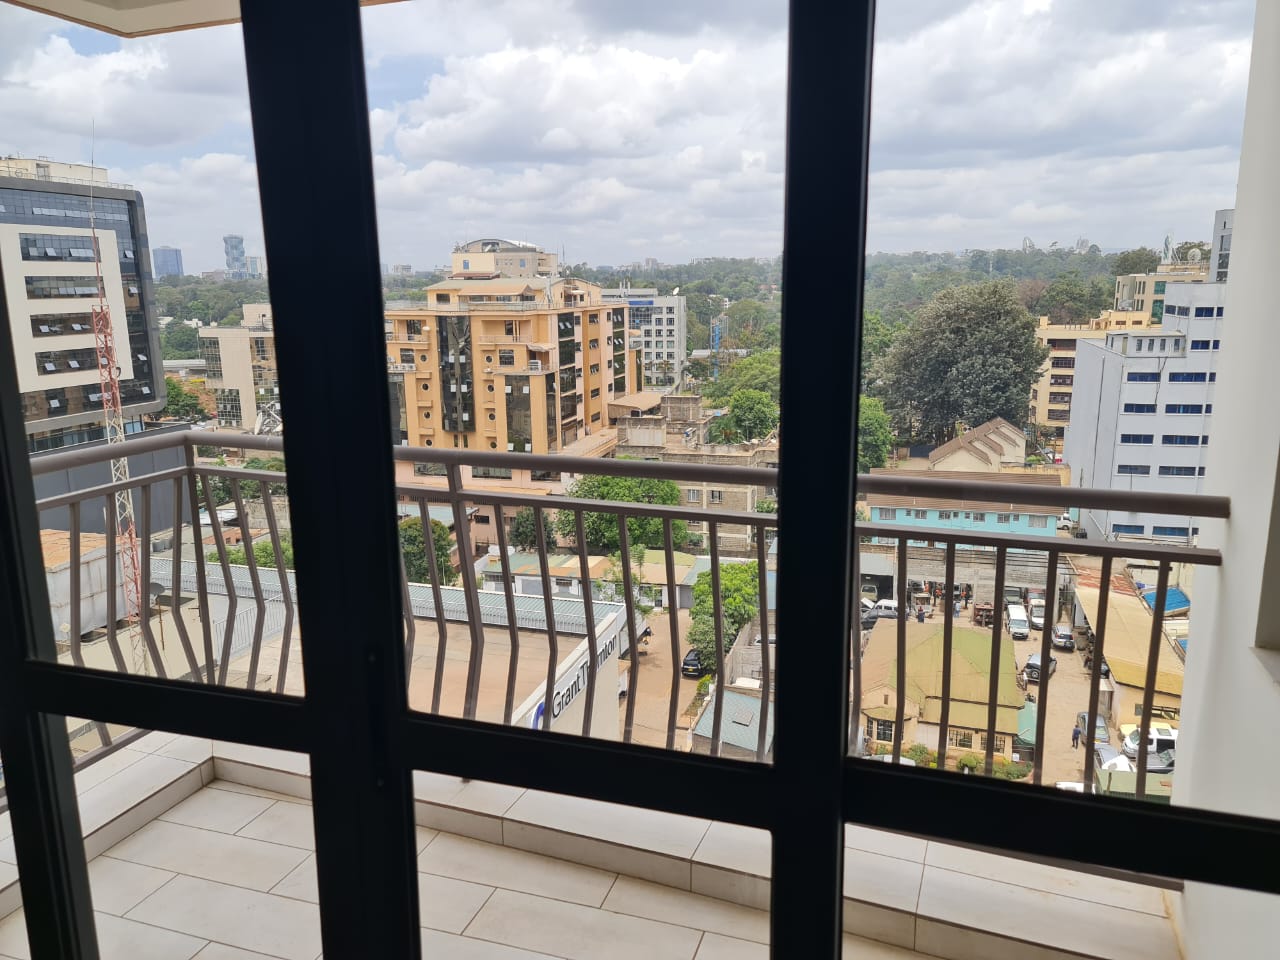 4 Bedroom New Penthouse for Rent in the heart of Westlands with great views, lift, borehole, power backup generator For Rent at Ksh160k (3)